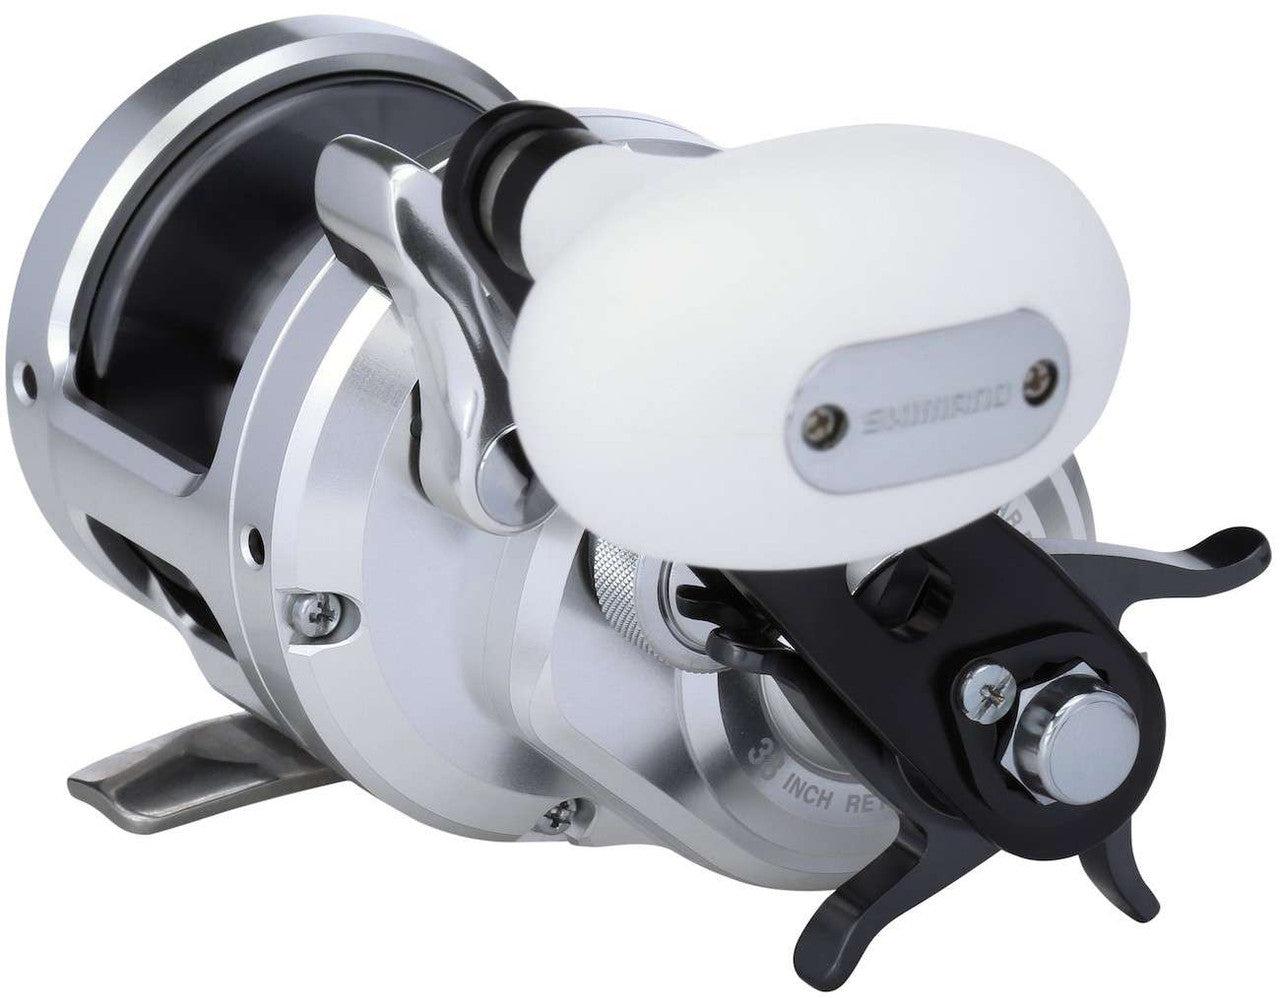 Anyone have experience with this reel? Trinidad 12n. Is $225 worth